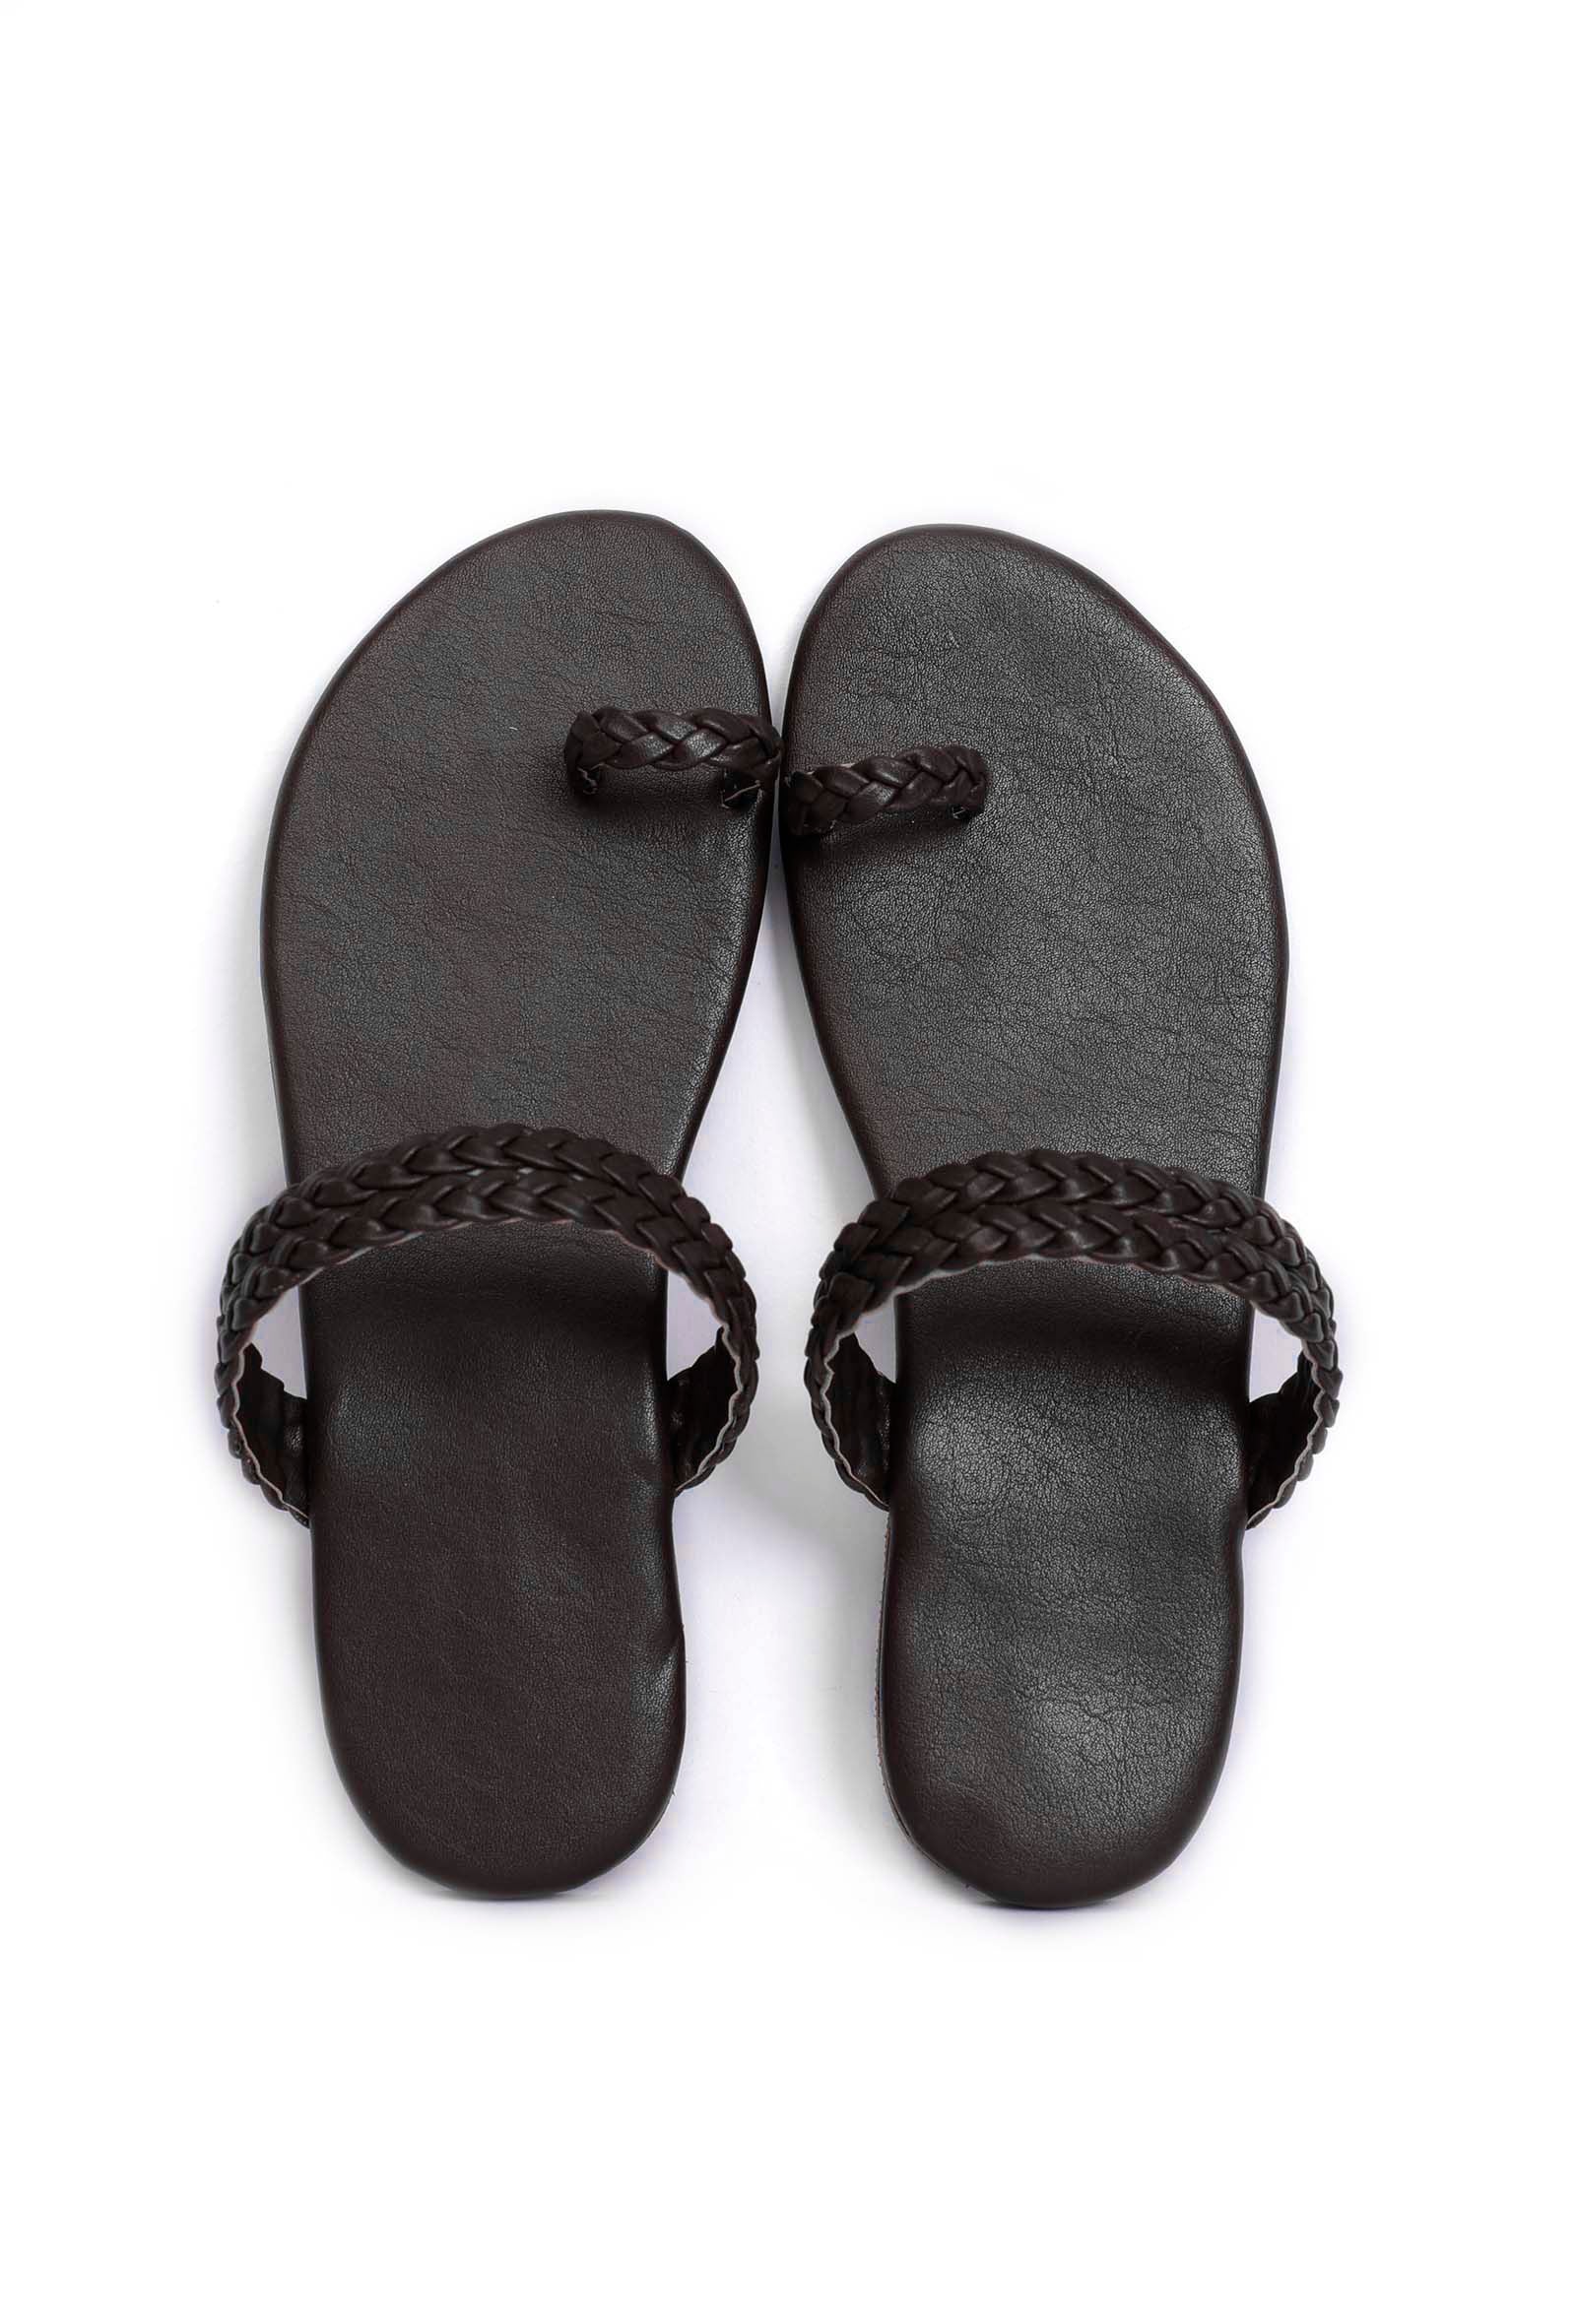 Brown Knotted Cruelty Free Leather Sandals